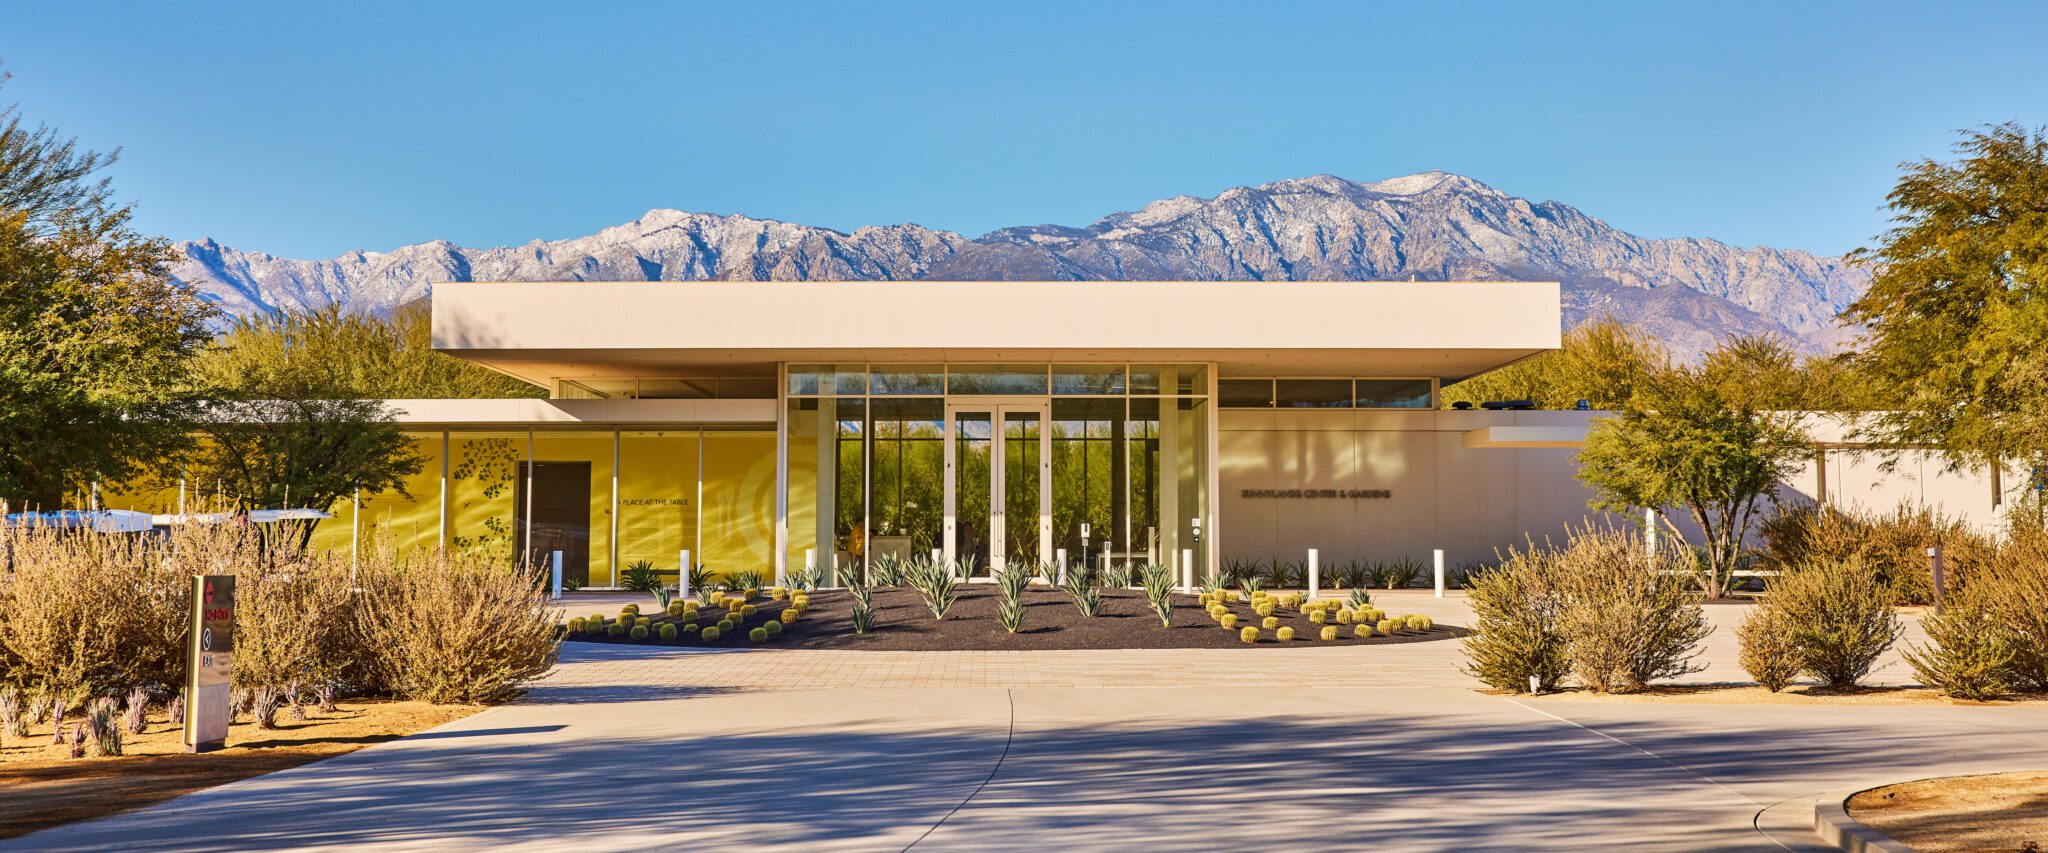 A modern building with large glass windows and a flat roof, with the text "A PLACE AT THE TABLE" on the front, set against a backdrop of towering mountains and a blue sky. The landscape features desert vegetation and a clear driveway leading to the entrance.